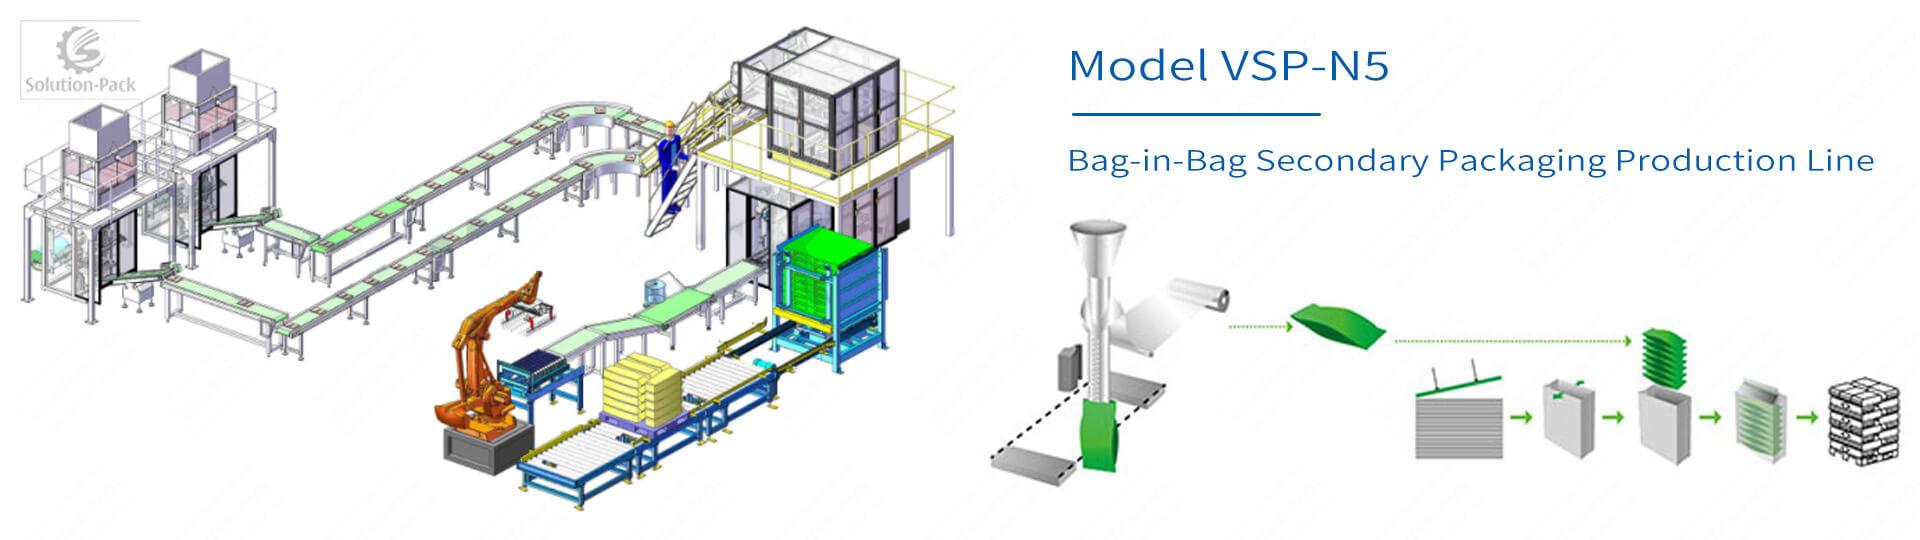 Solution-Pack | VSP-N5 Automatic Bag-in-Bag Secondary Packaging Machine Production Line Heading Banner Picture | Secondary Packing Machine | Primary and Secondary Packaging Machine | Bag in Bag Repacking machine | Secondary Packaging Solution